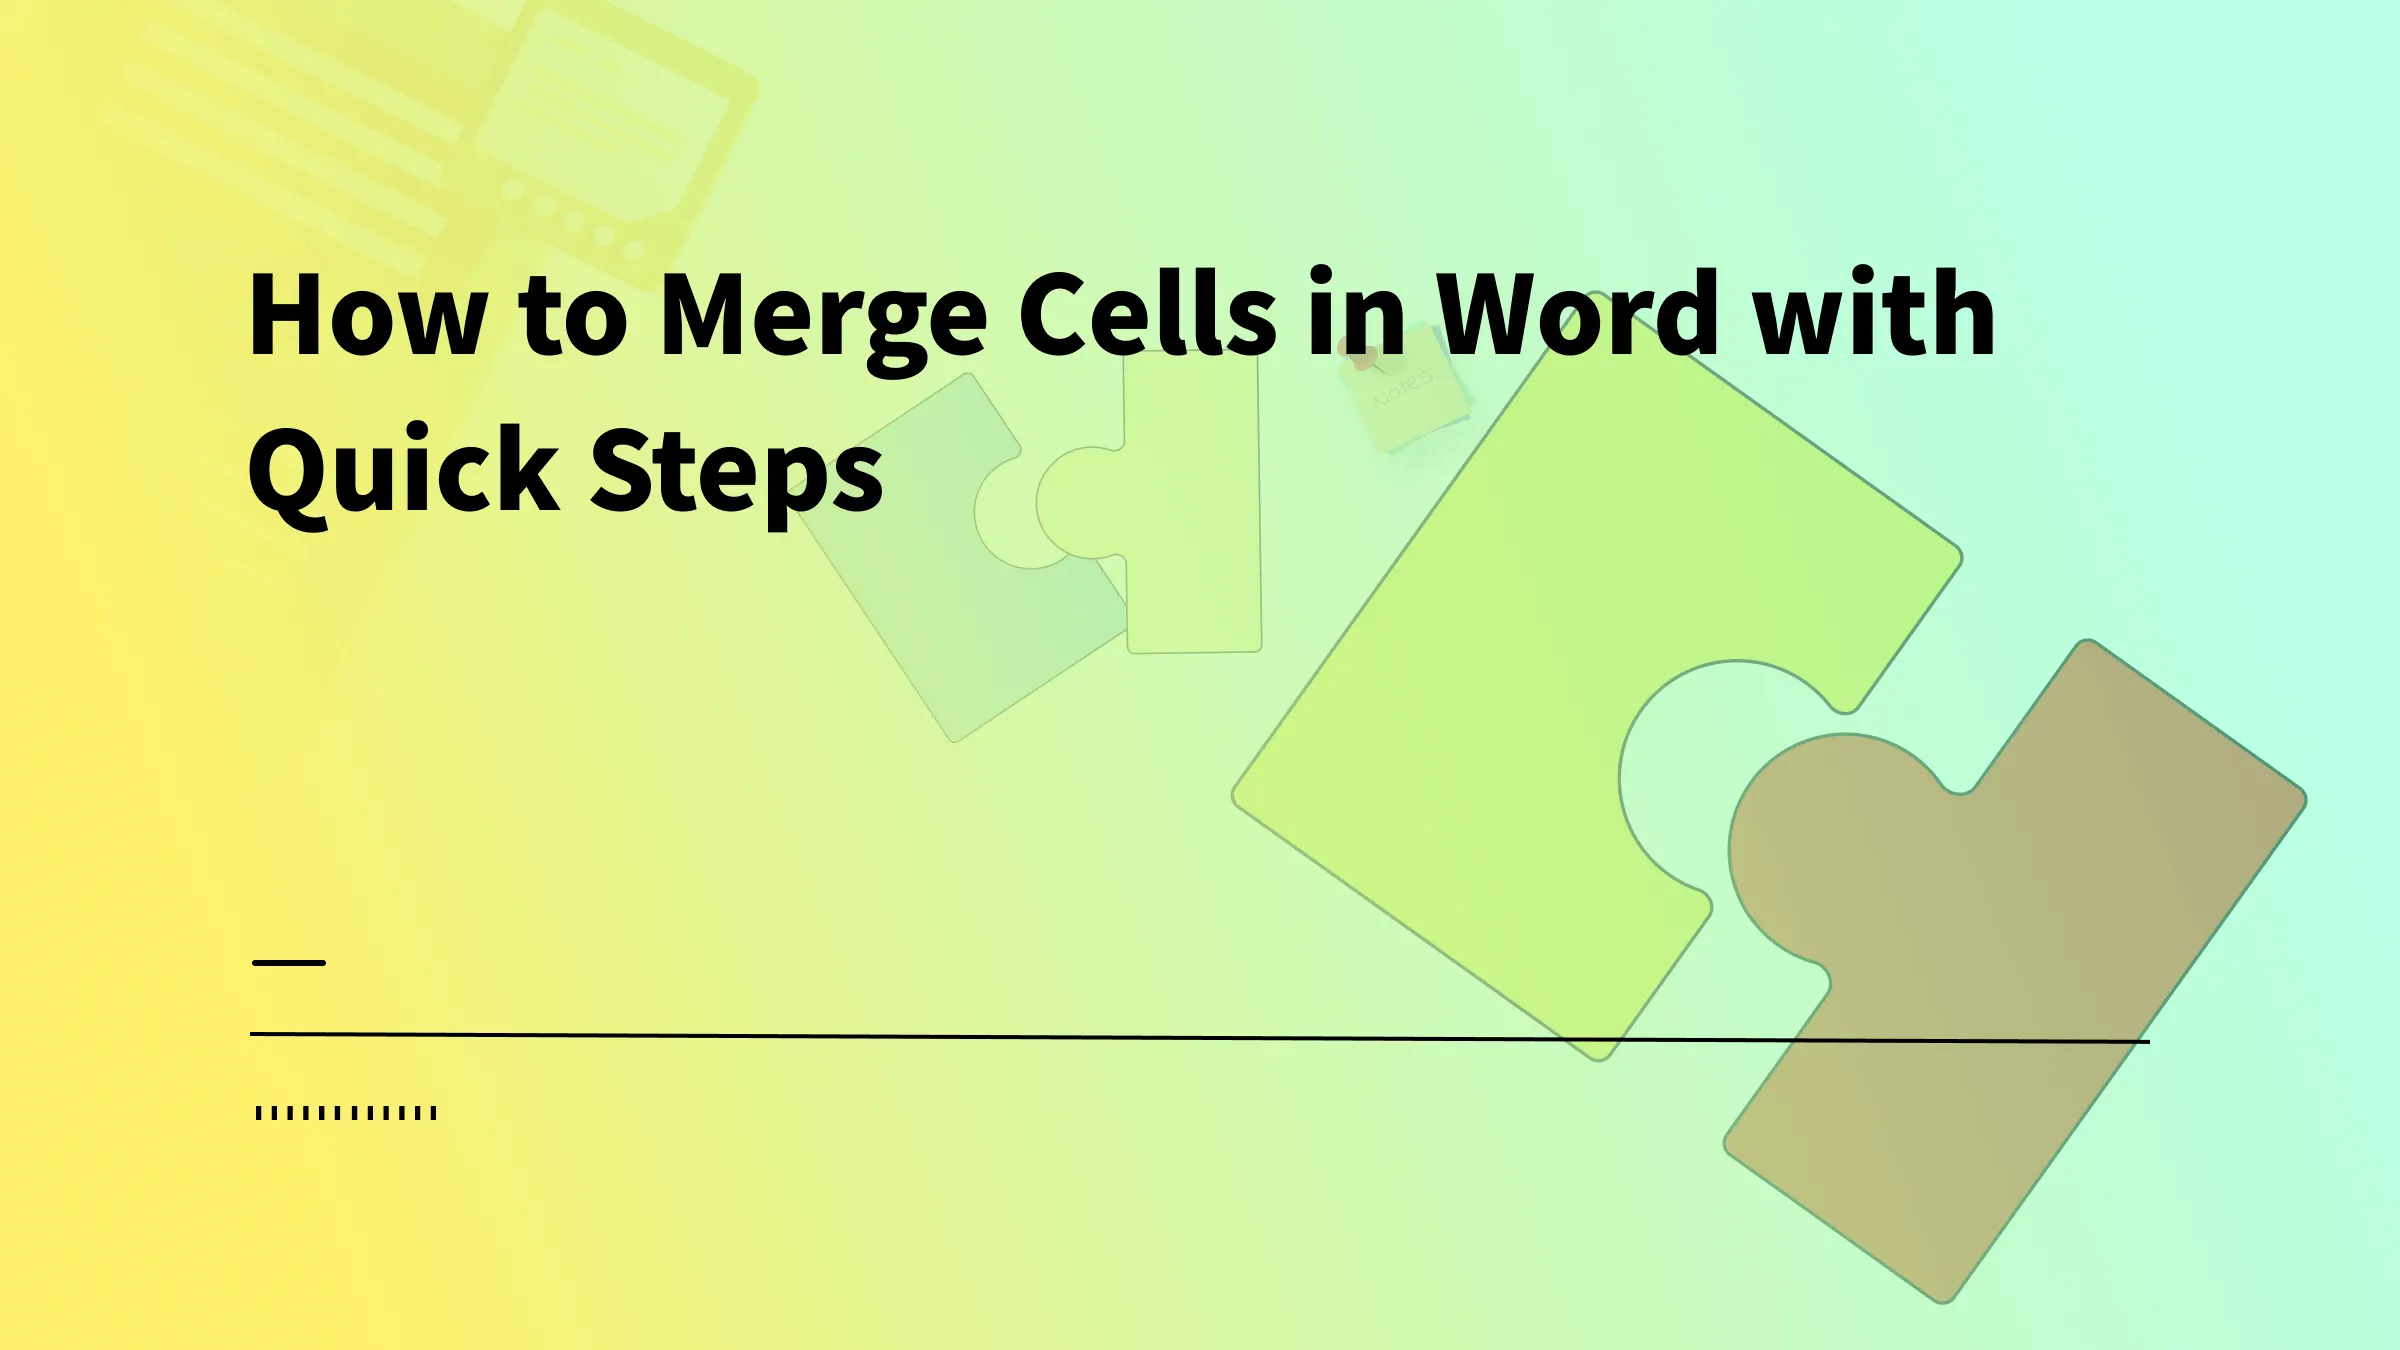 How to Merge Cells in Word with Quick Steps